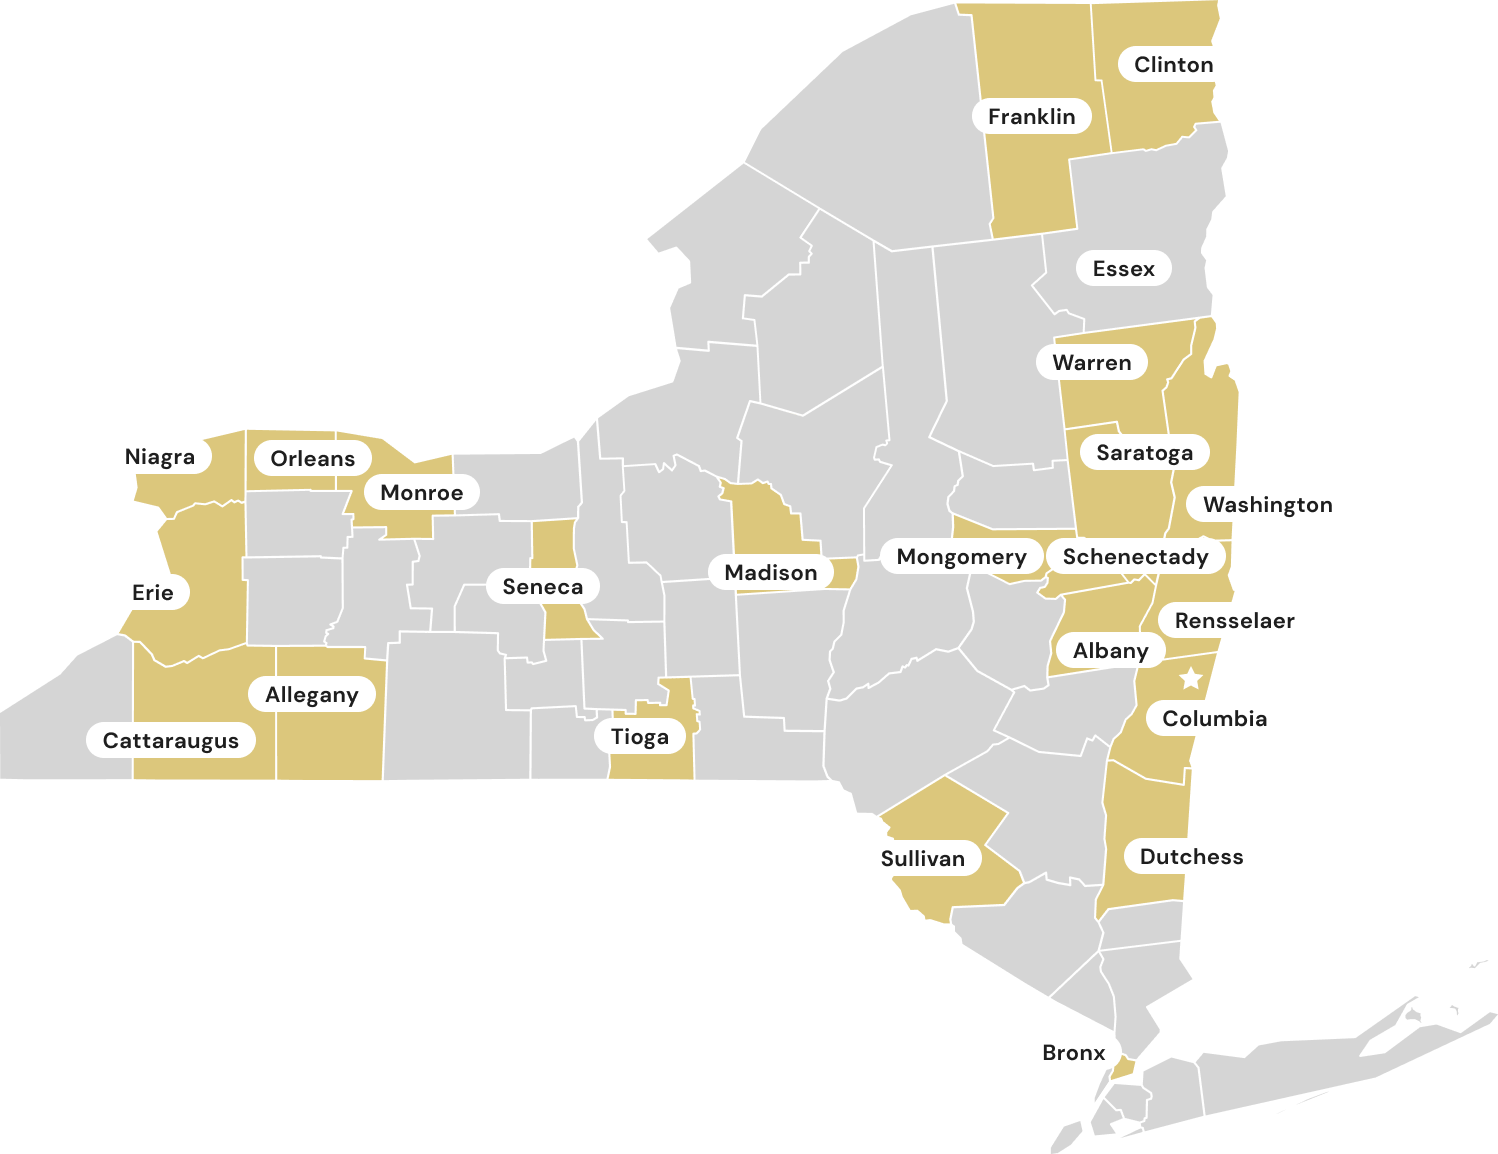 Map of new york state showing various counties in different shades of gray and yellow, highlighting selected counties like erie, monroe, albany, and bronx.